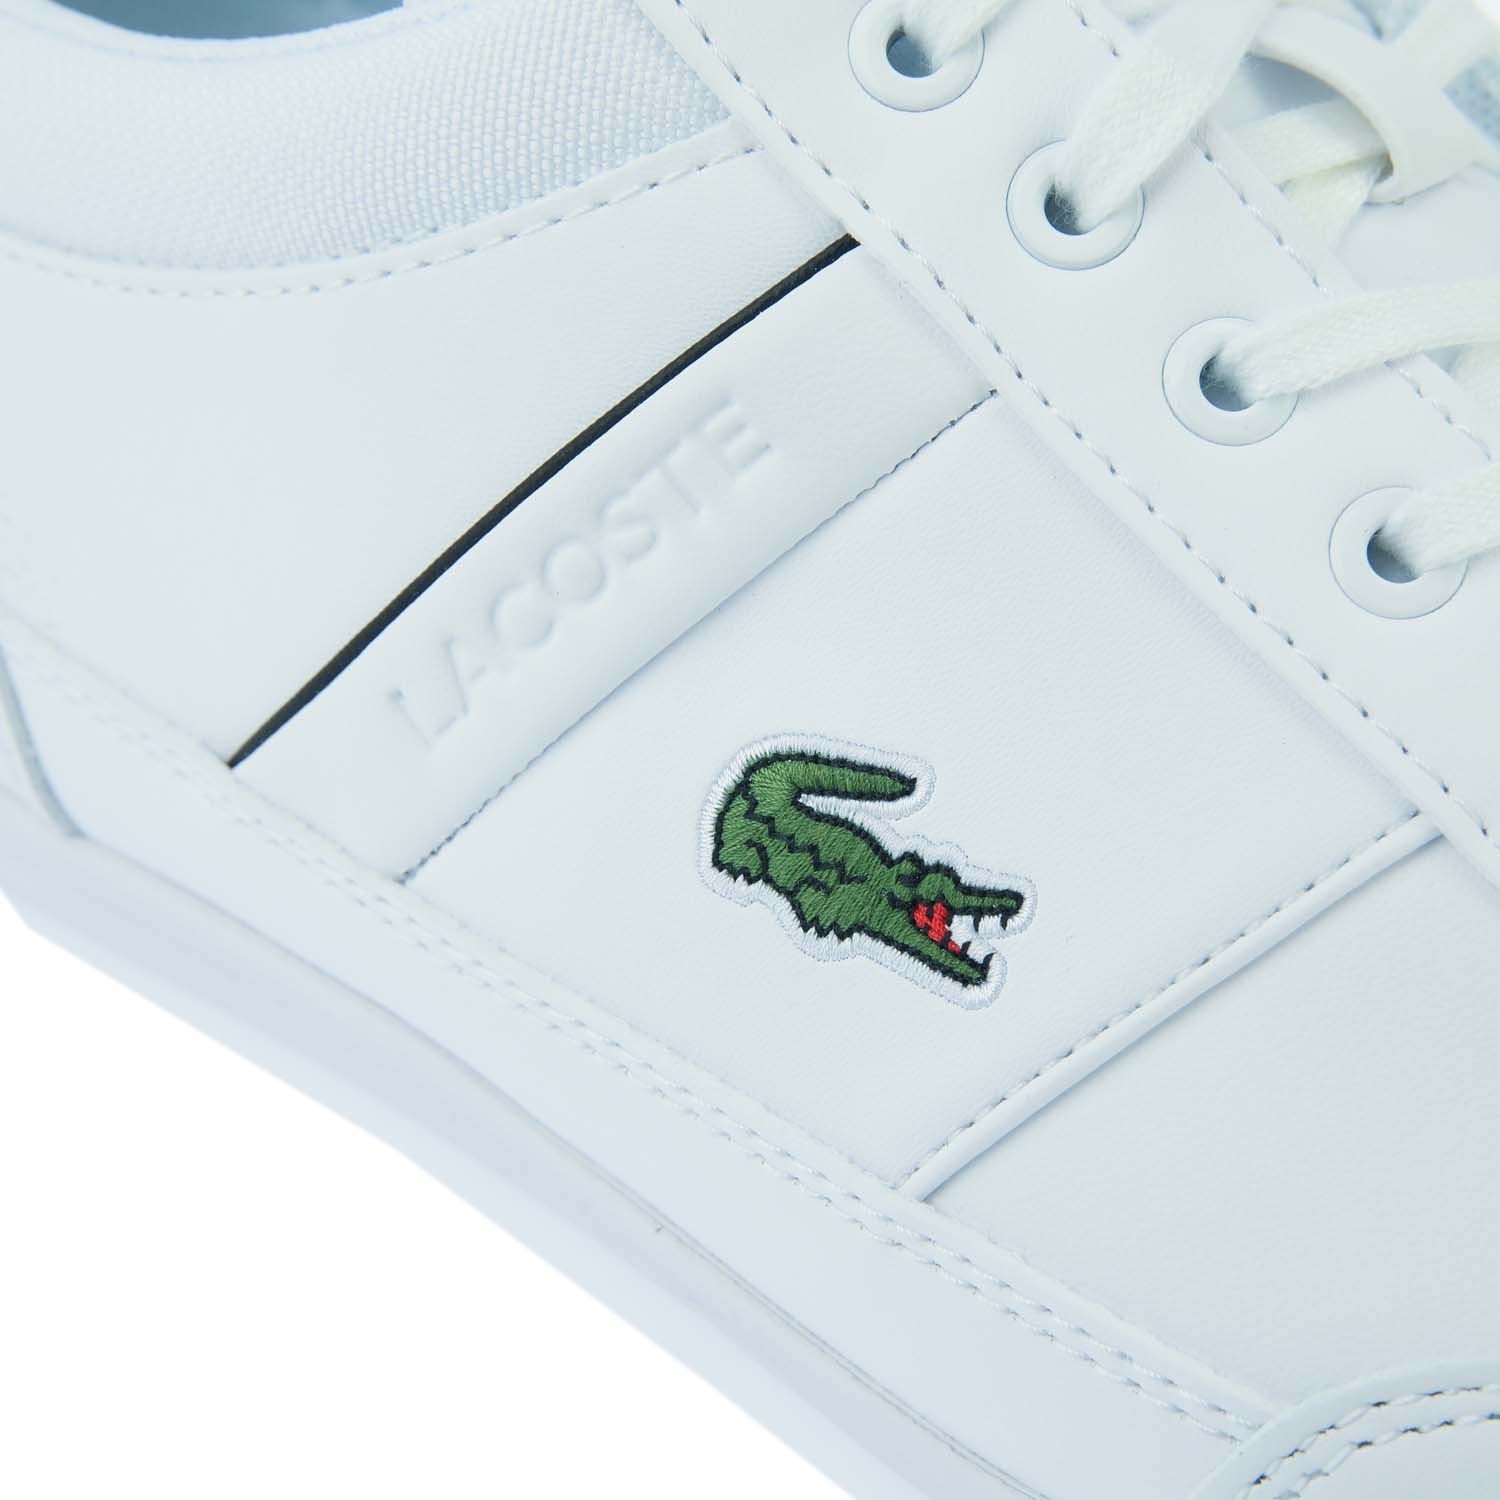 Mens Lacoste Chaymon Trainers in white black.- Synthetic and leather uppers. - Lace up closure.- Embroidered green crocodile on the quarter. - Pared-back design in tonal shades for maximum versatility.- Rubber outsole.- Leather upper  Textile linings.- Ref: 742CMA0014147